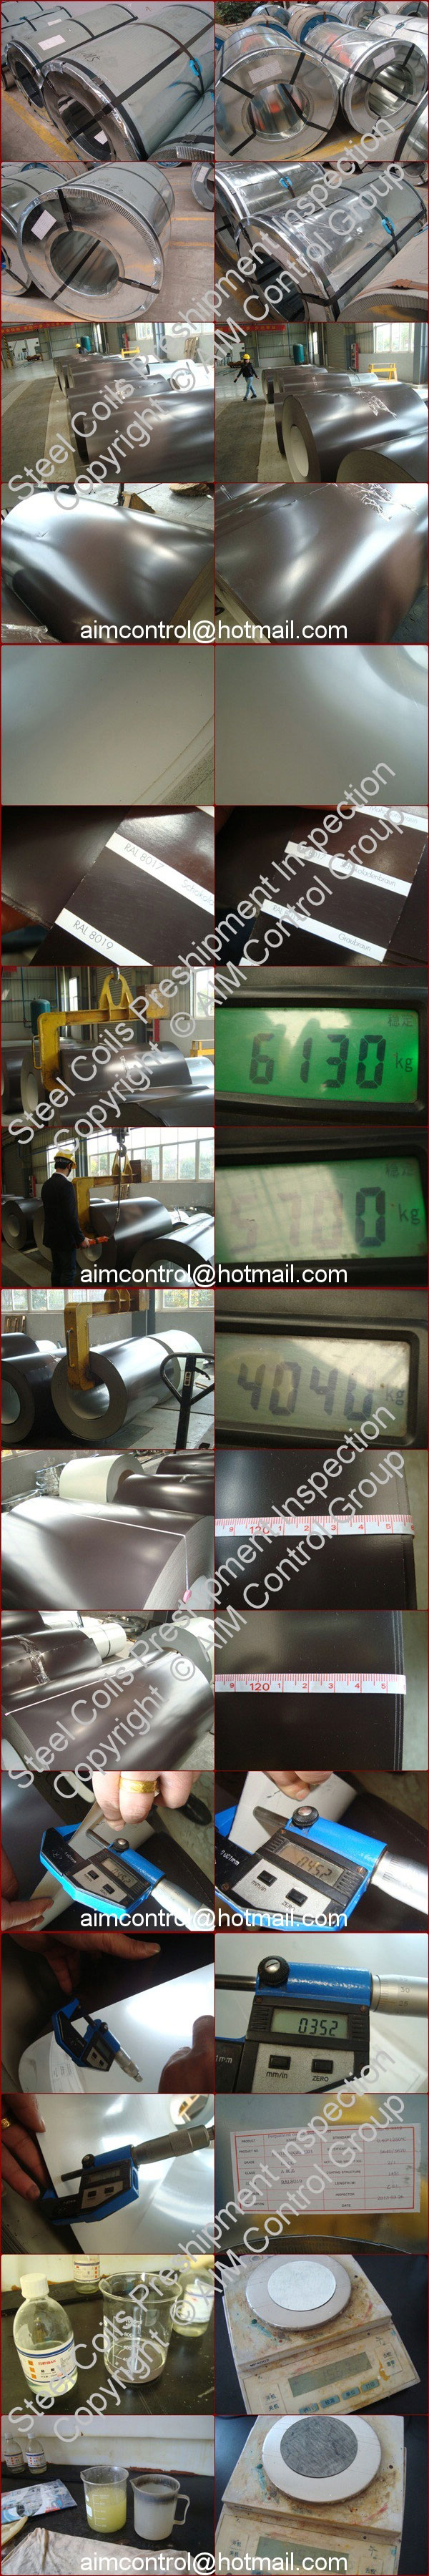 Rolled_Steel_Quality_Inspection_and_Certificate_services_AIM_Control